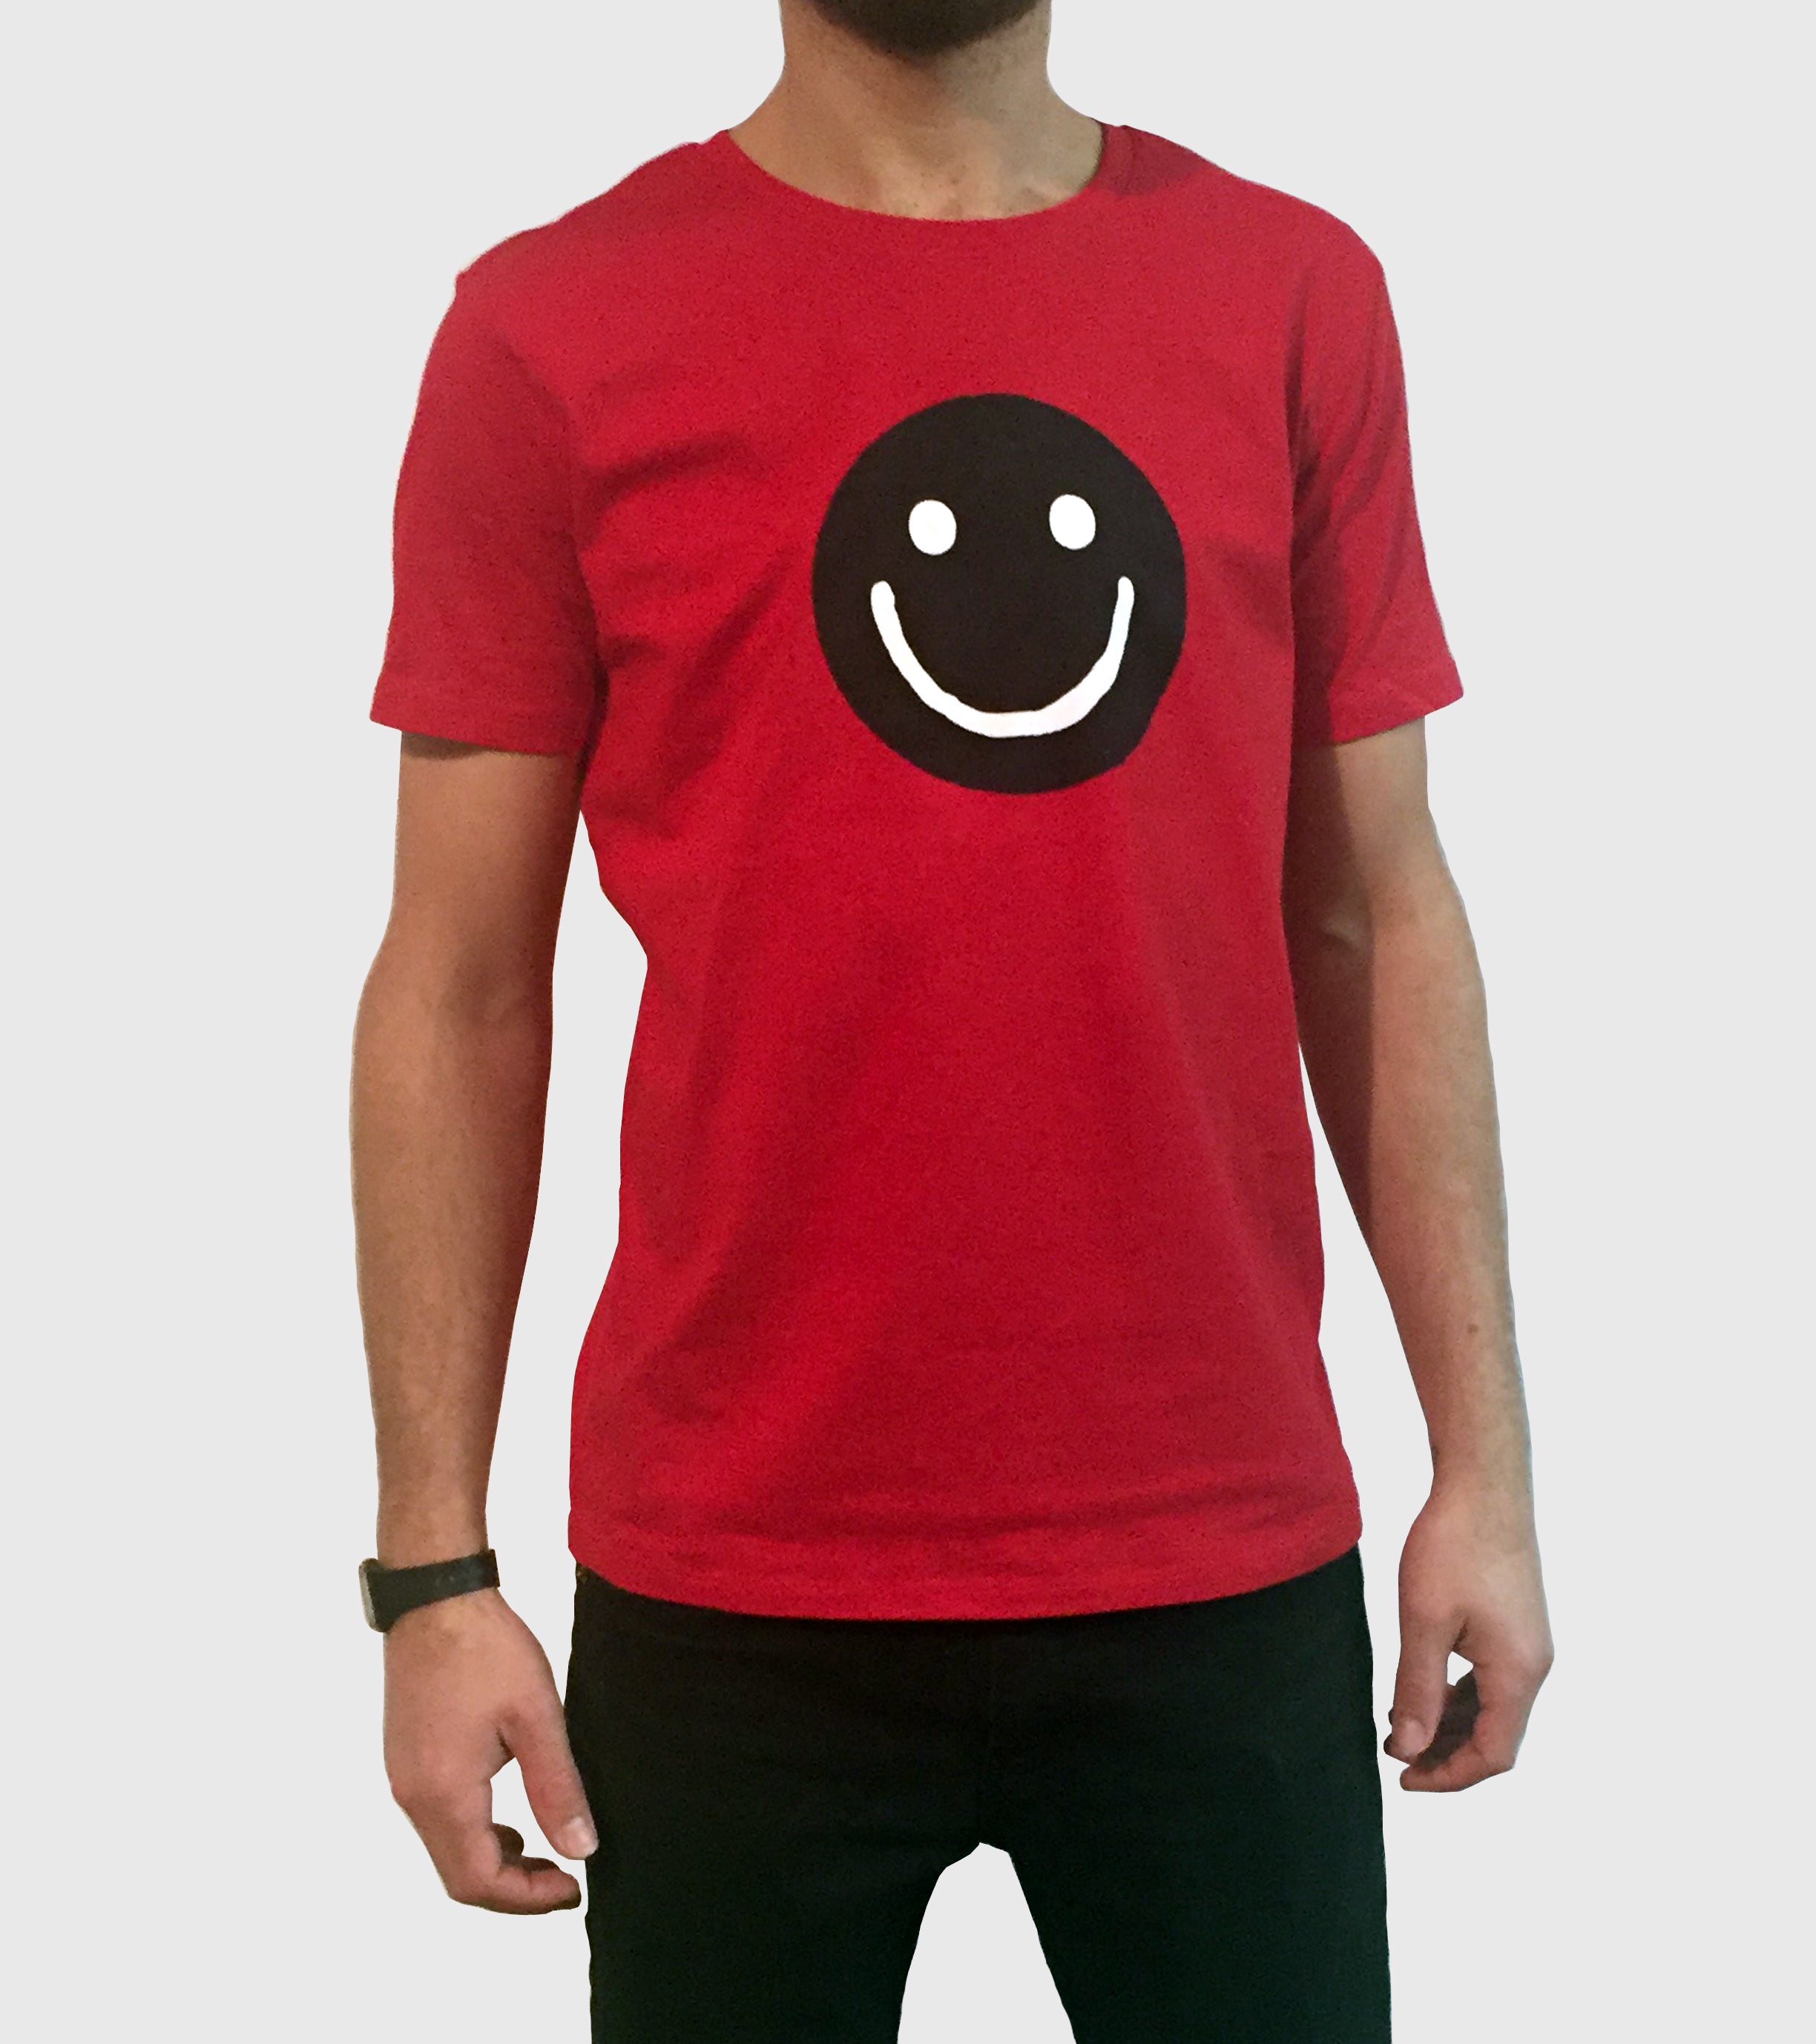 Smiley T-Shirt (Red shirt - White smiley)